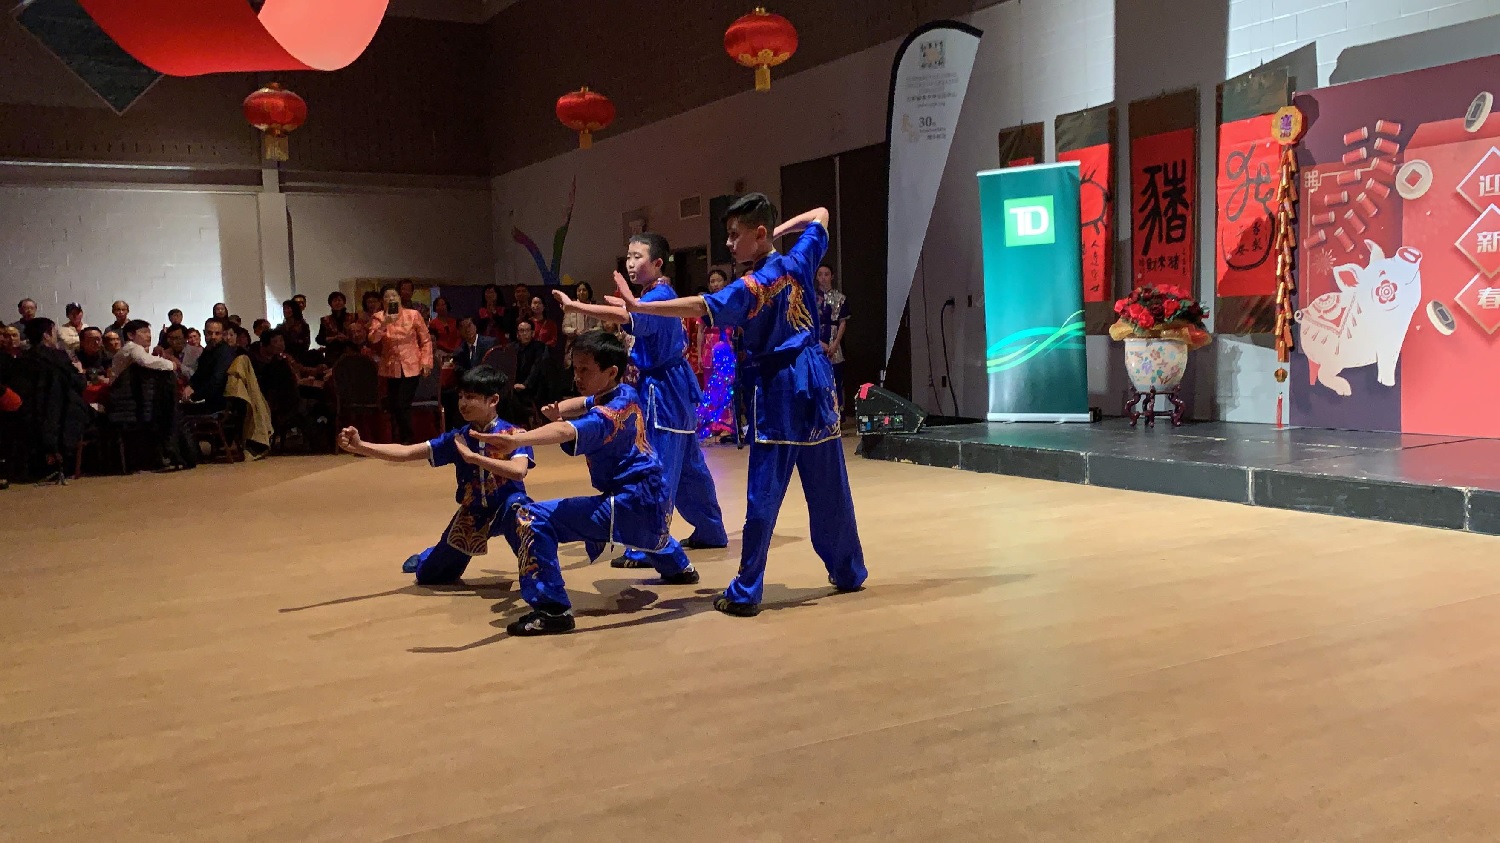 wayland-li-wushu-year-of-the-pig-dinner-chinese-cultural-centre-2019-12.jpg